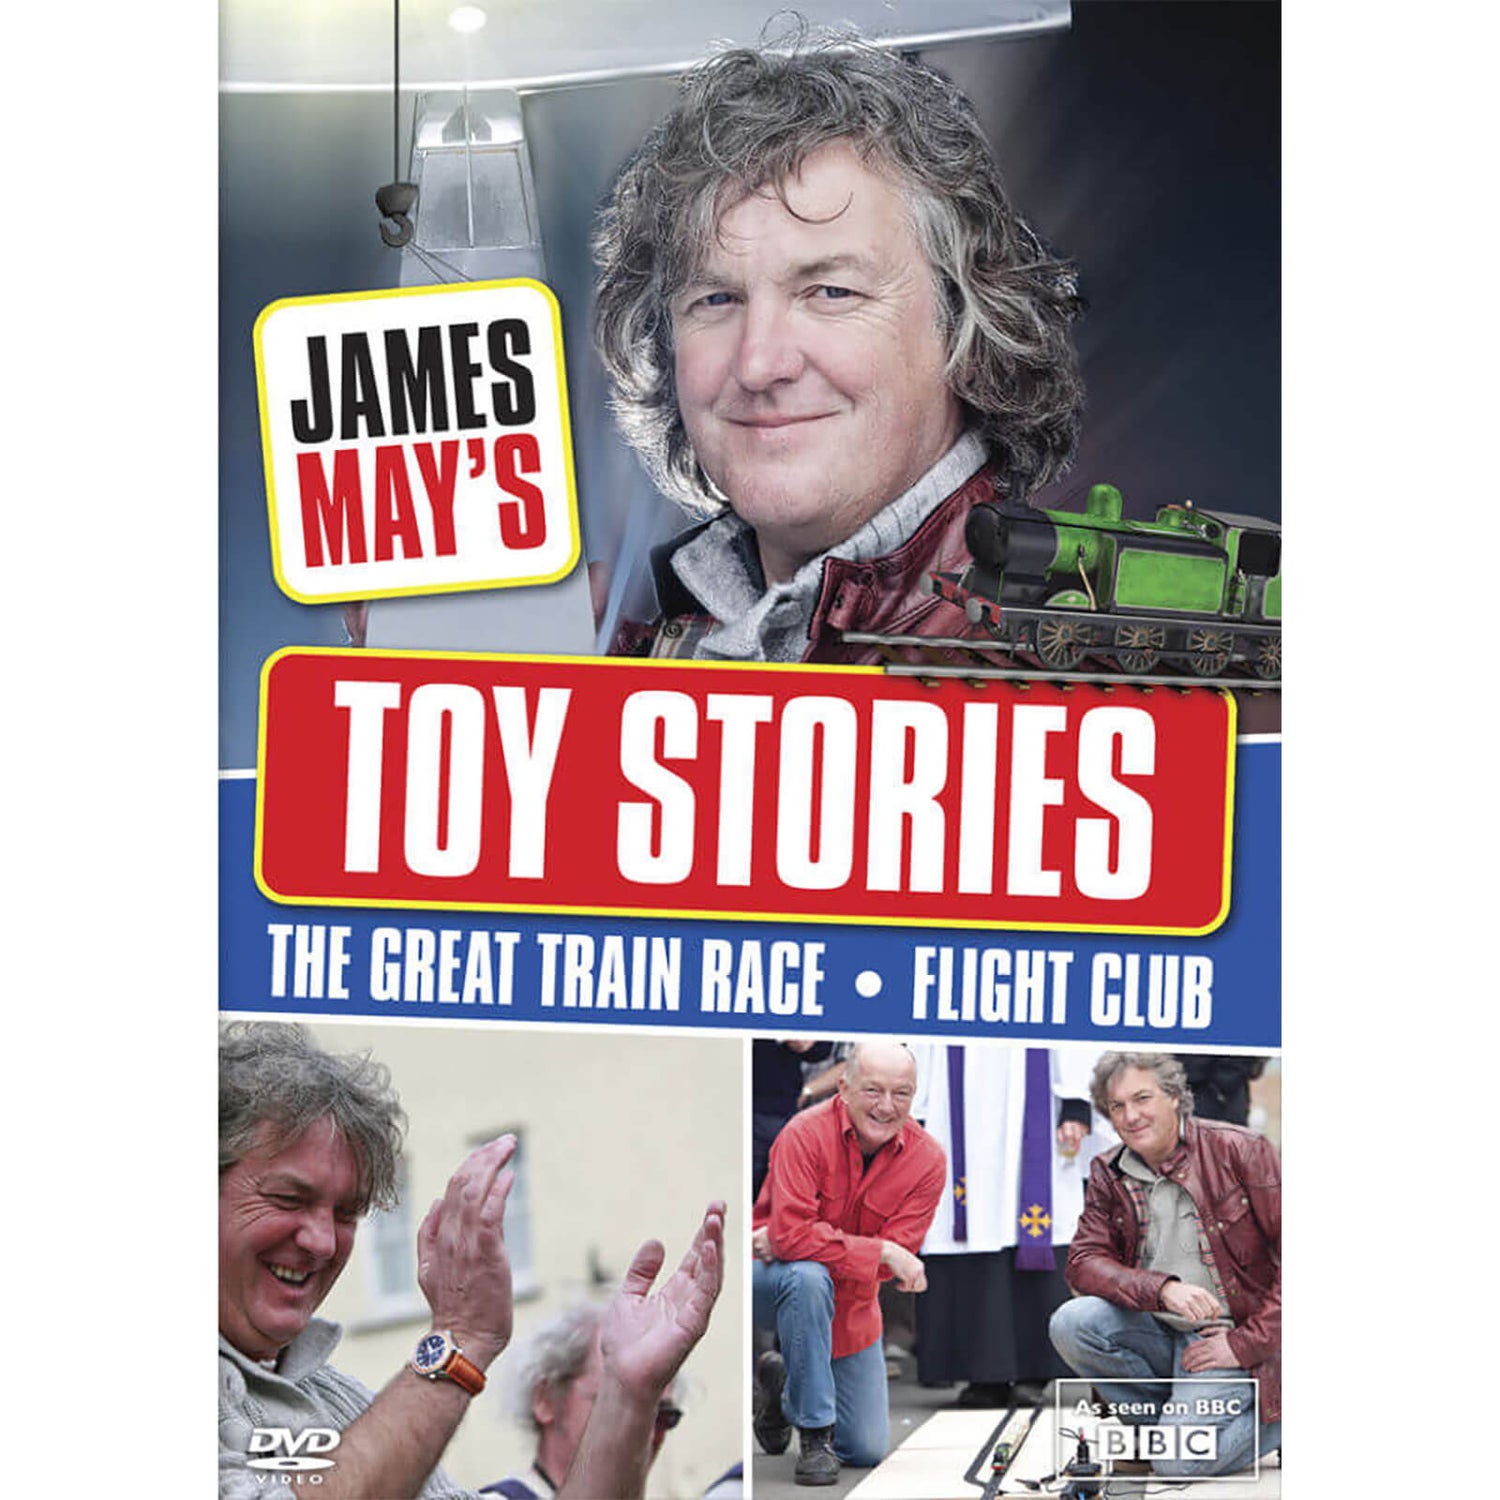 James May Toy Stories Special: The Great Train Race and Flight Club